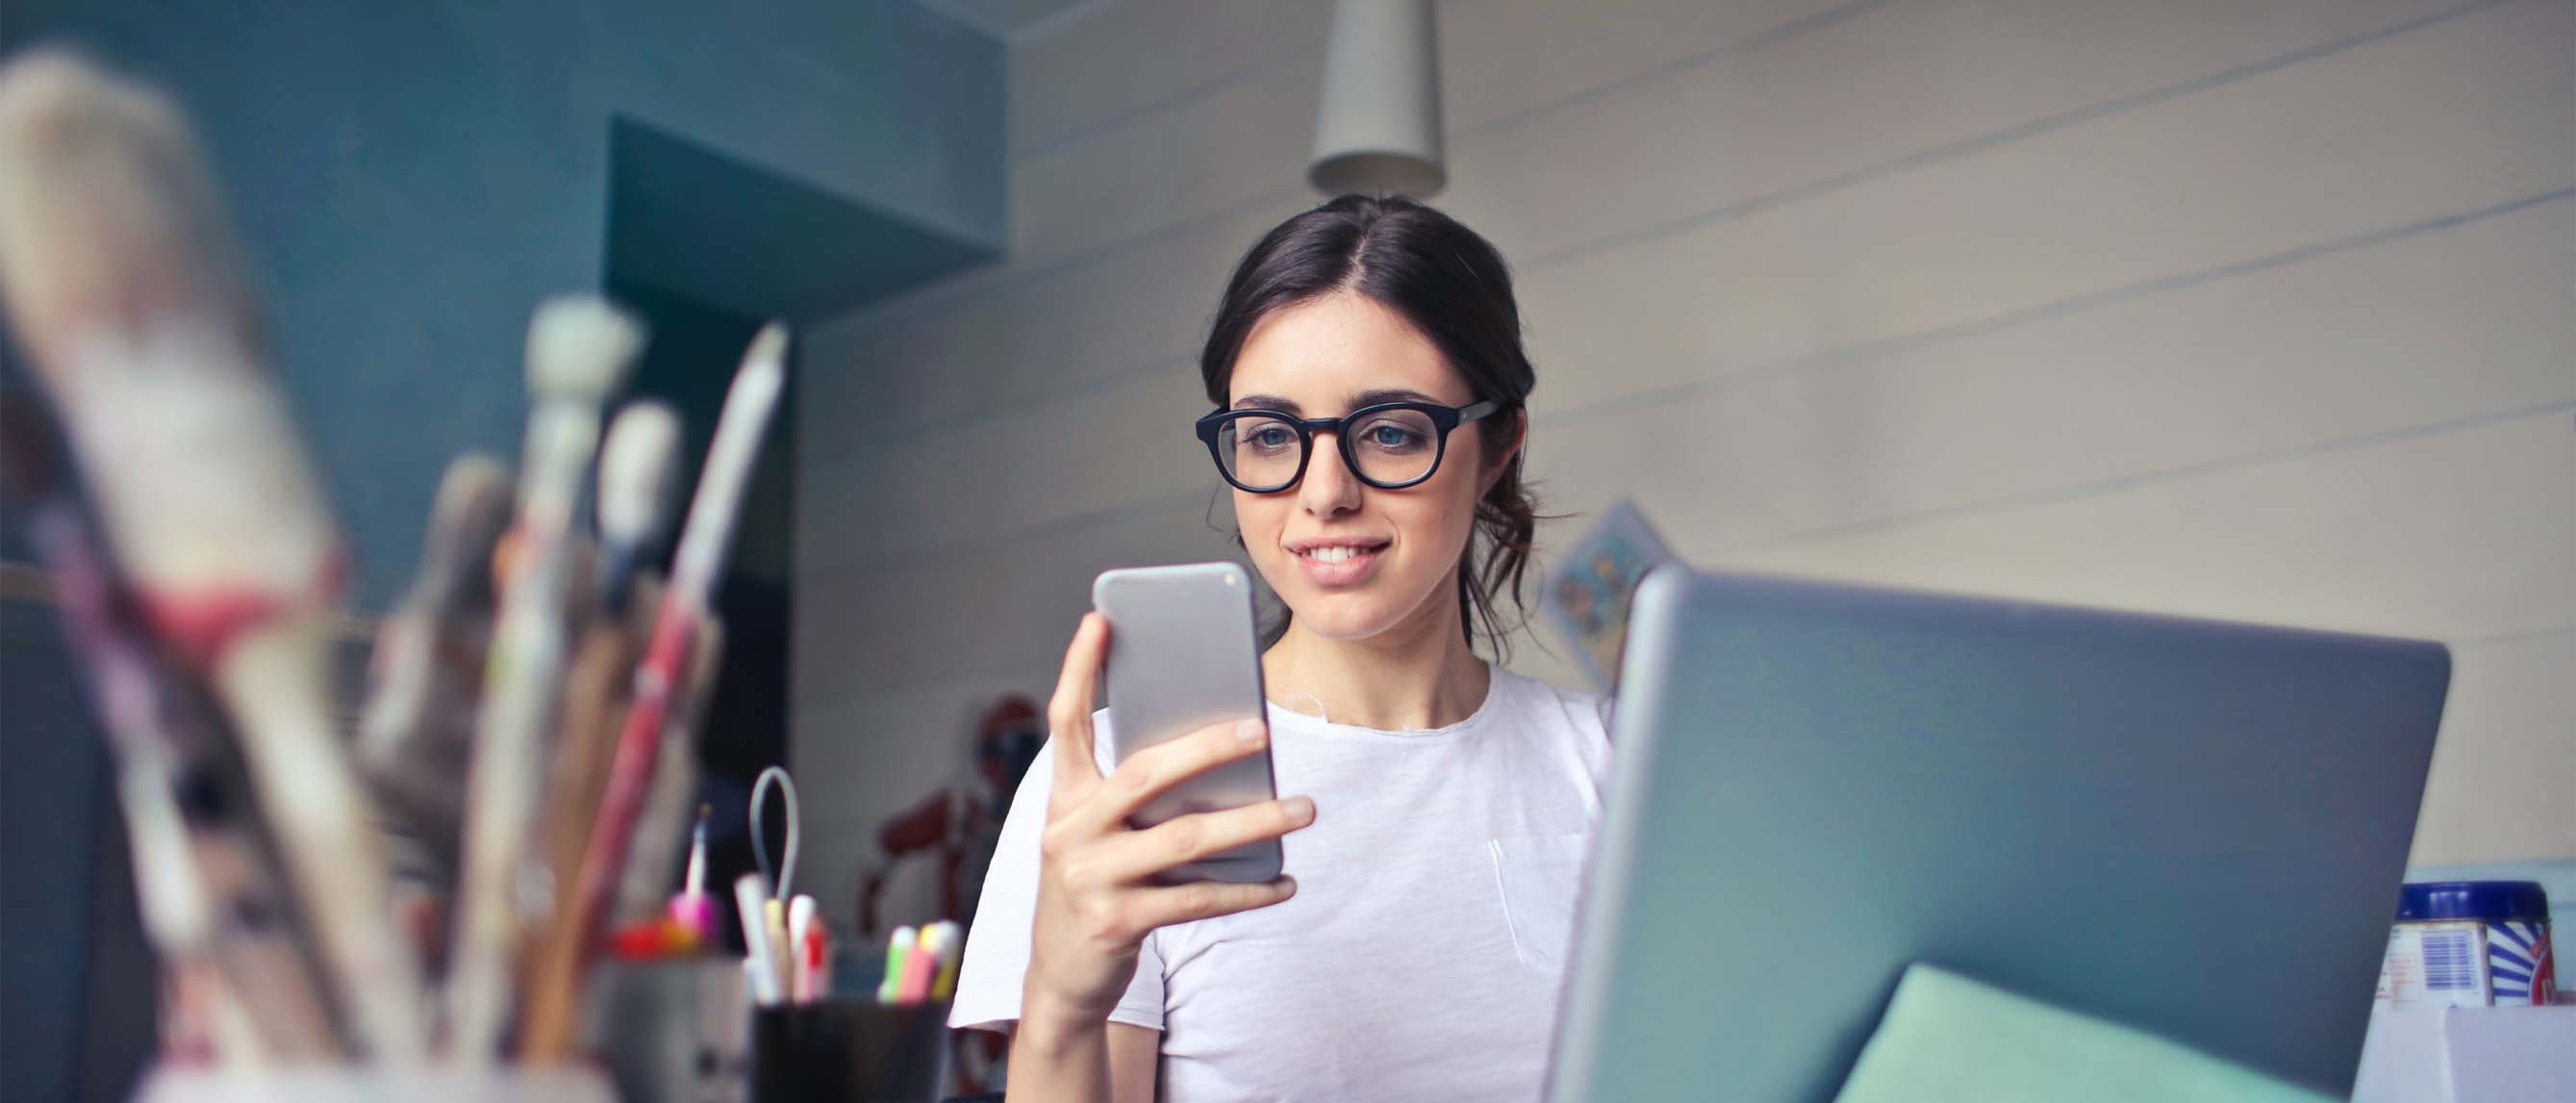 Woman wearing glasses looking at phone and laptop